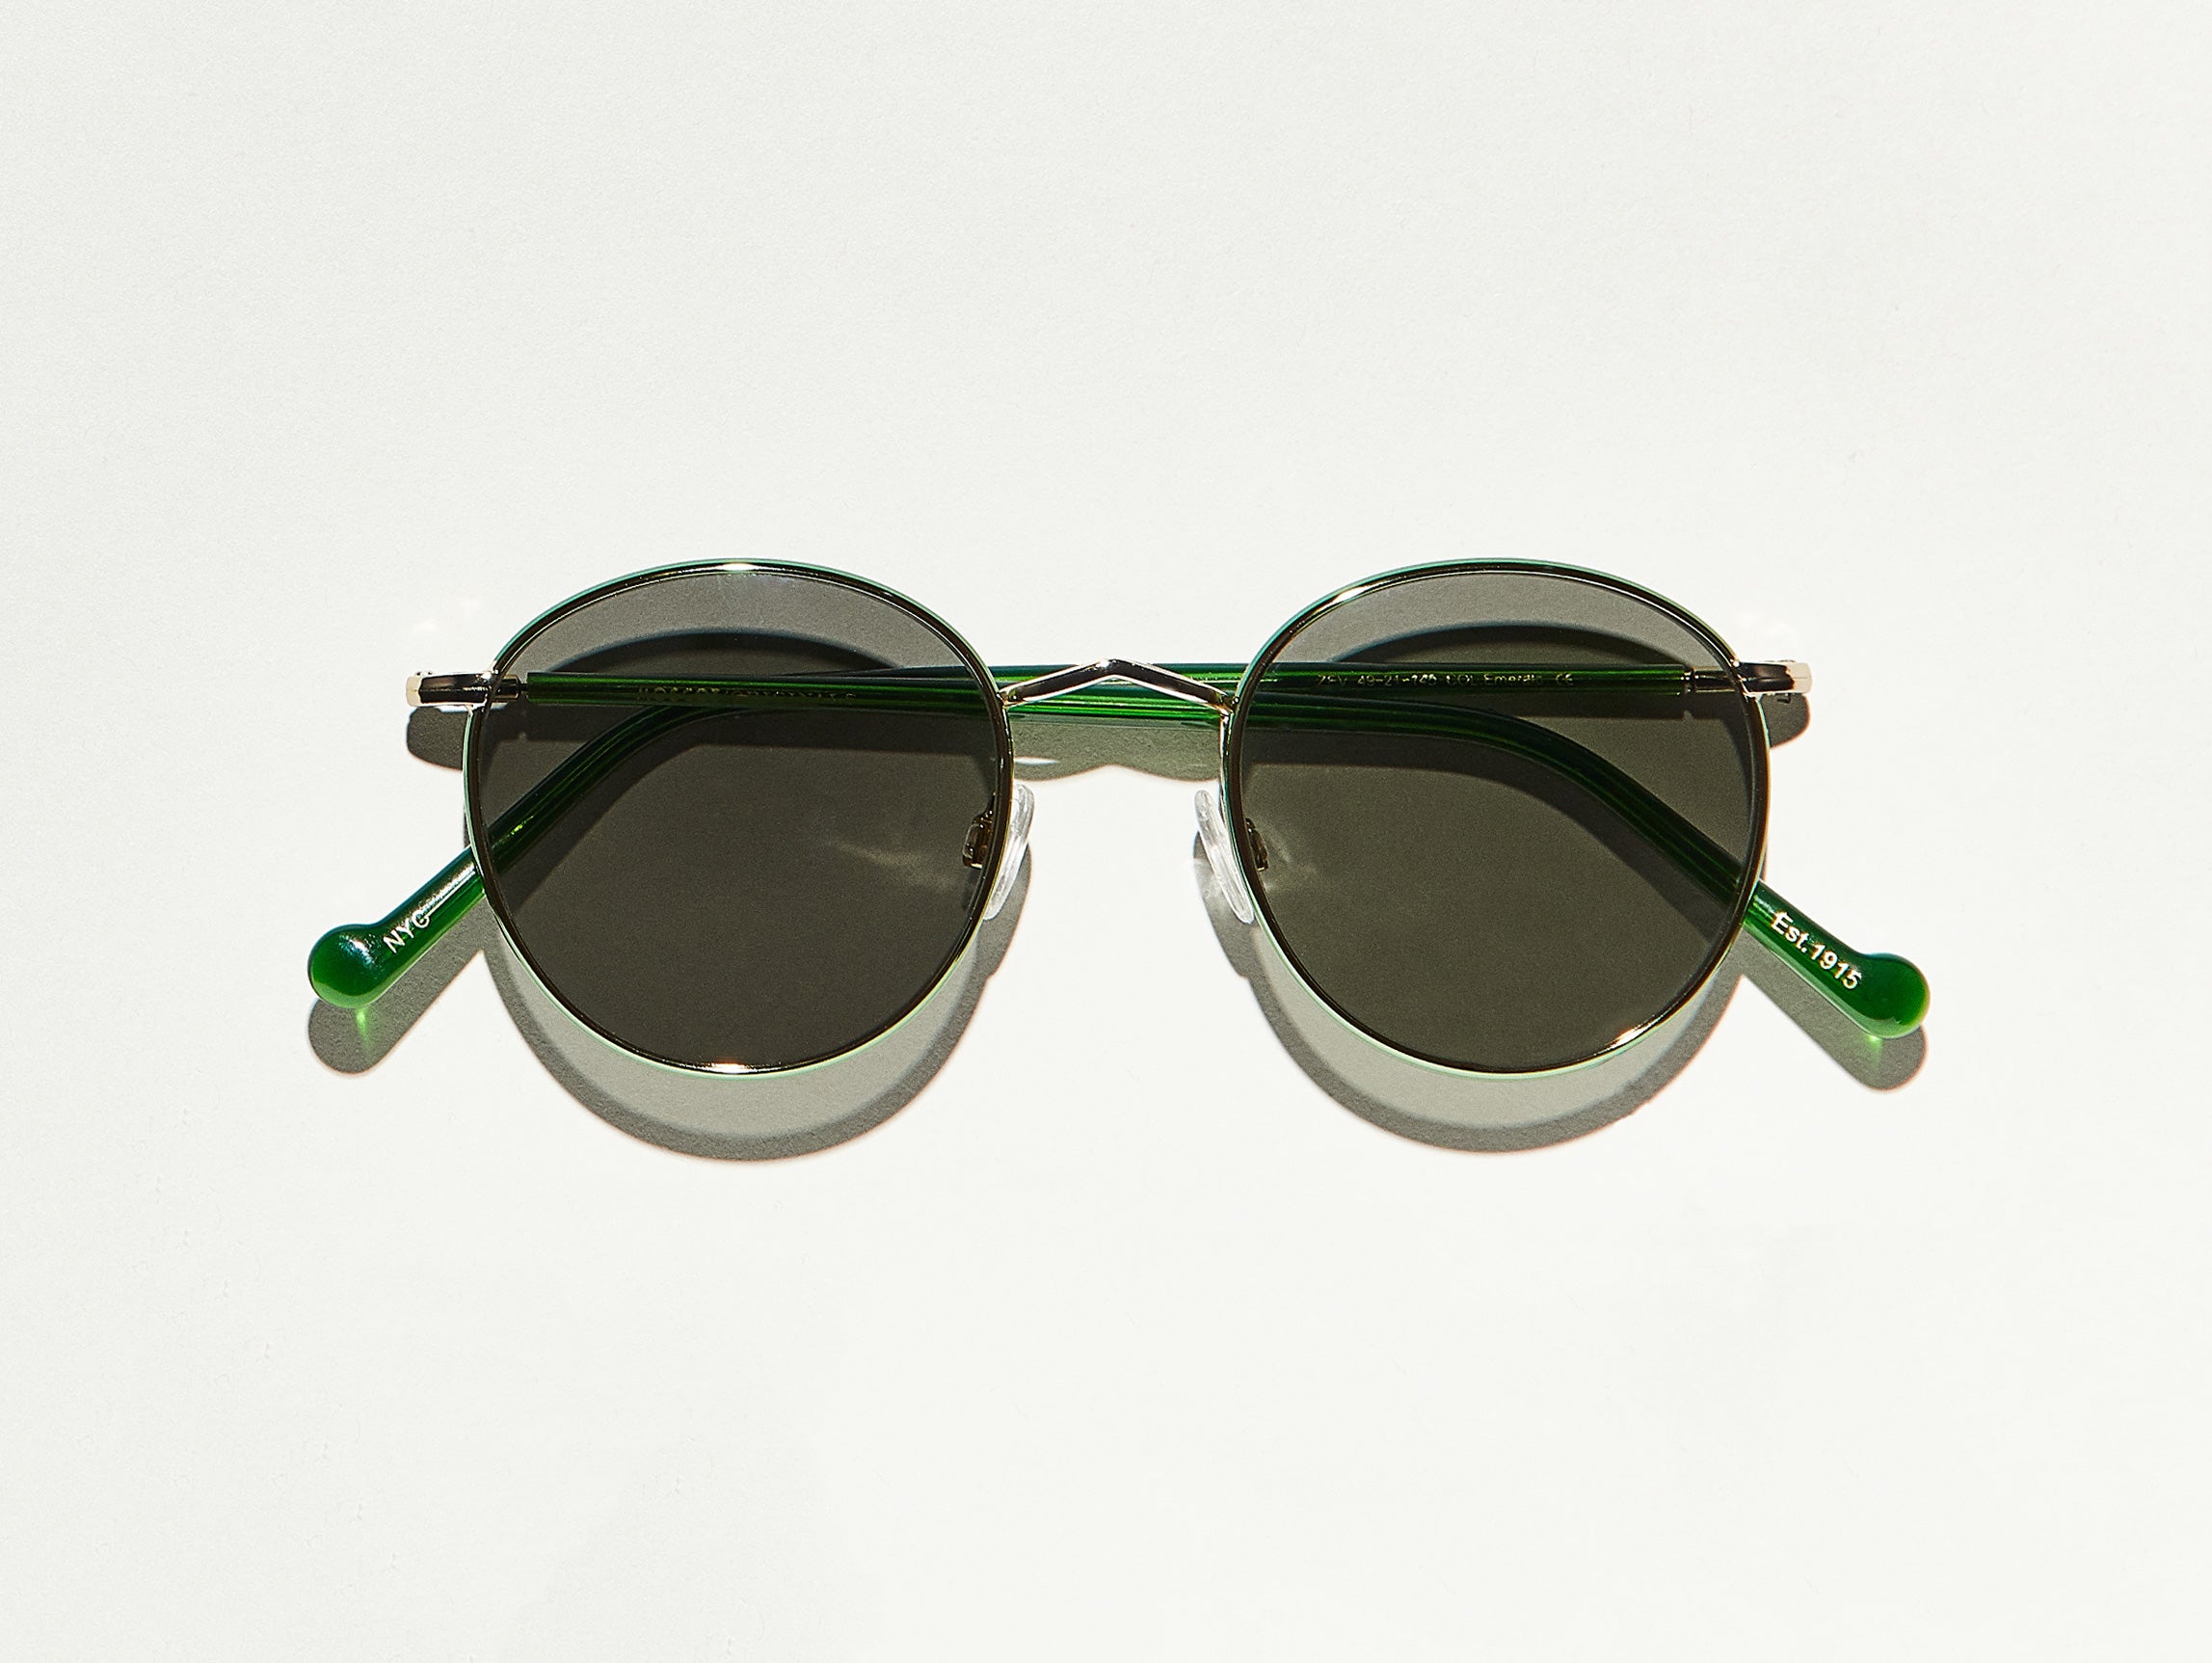 The ZEV SUN in Emerald/Gold with Grey Glass Lenses